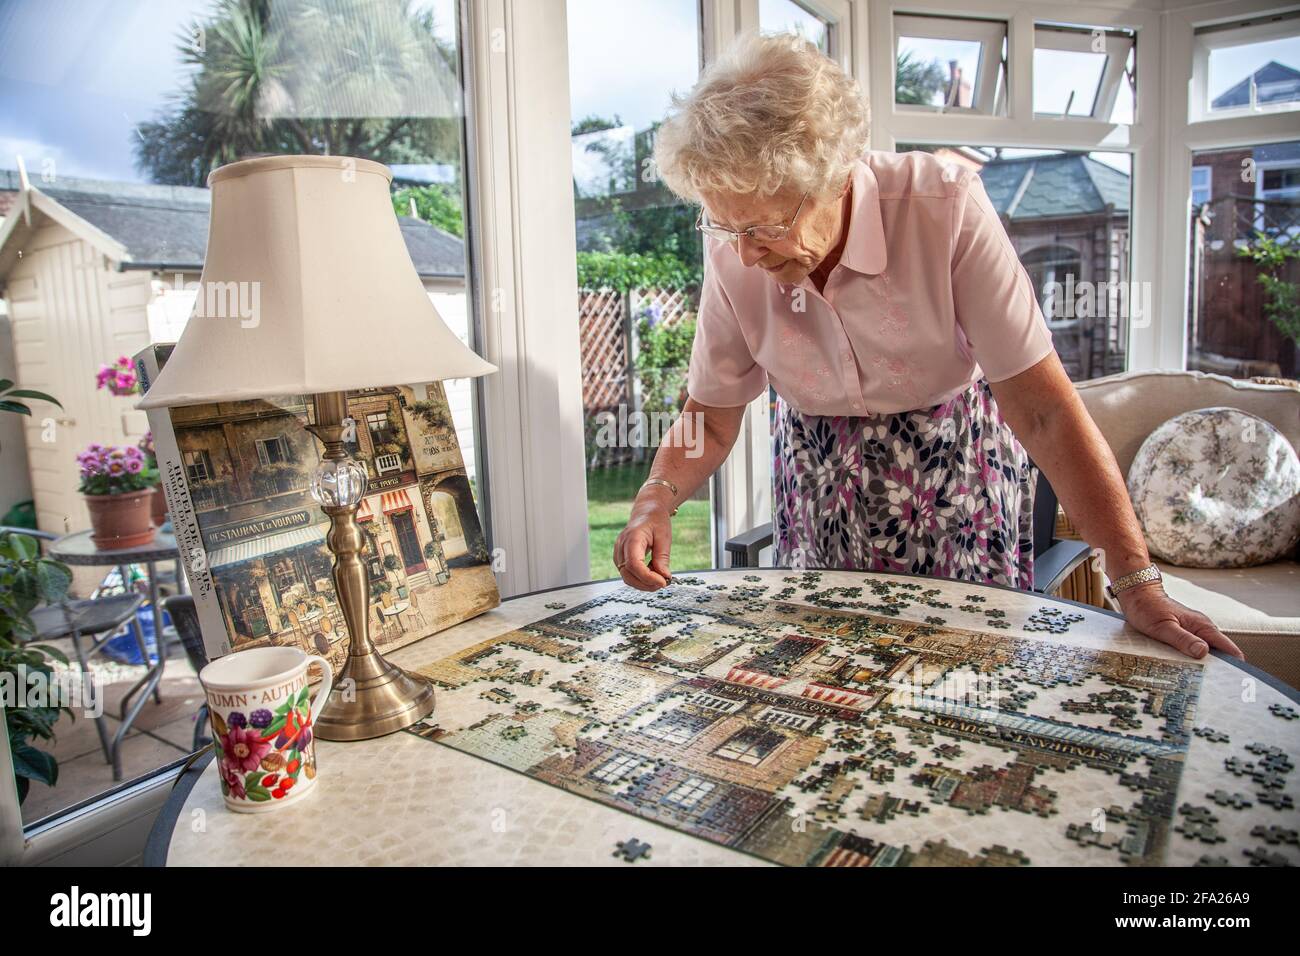 Elderly woman in her 70's making a jigsaw puzzle at her home residence, England, United Kingdom Stock Photo